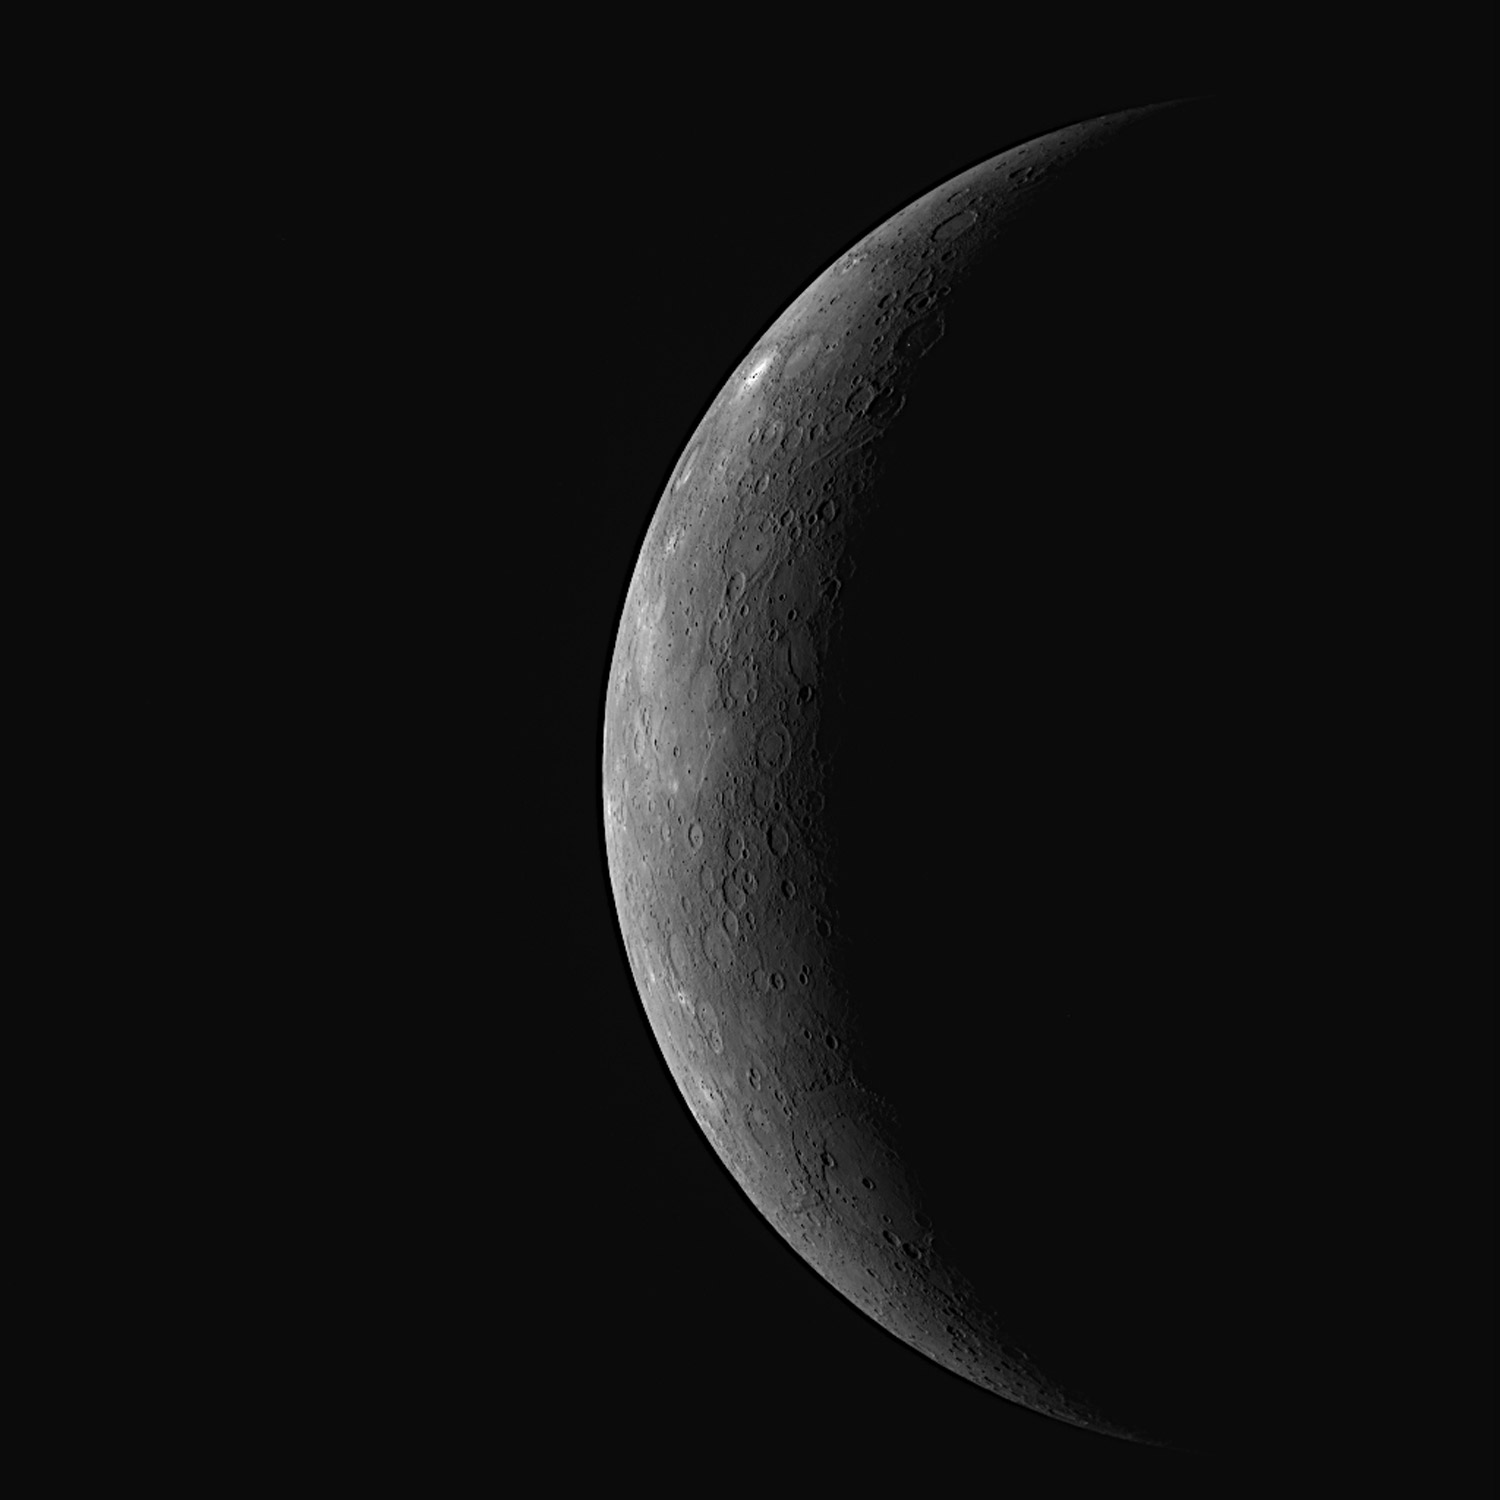 Sailing toward Mercury in 2008, Messenger took this picture of the world in a peaceful-looking crescent. Mariner 10 photographed this region in 1974, but the sun was poorly situated that day, located directly overhead. That washed out shadows and made the topography impossible to read. Here, the oblique illumination provides a much better representation of the planet.